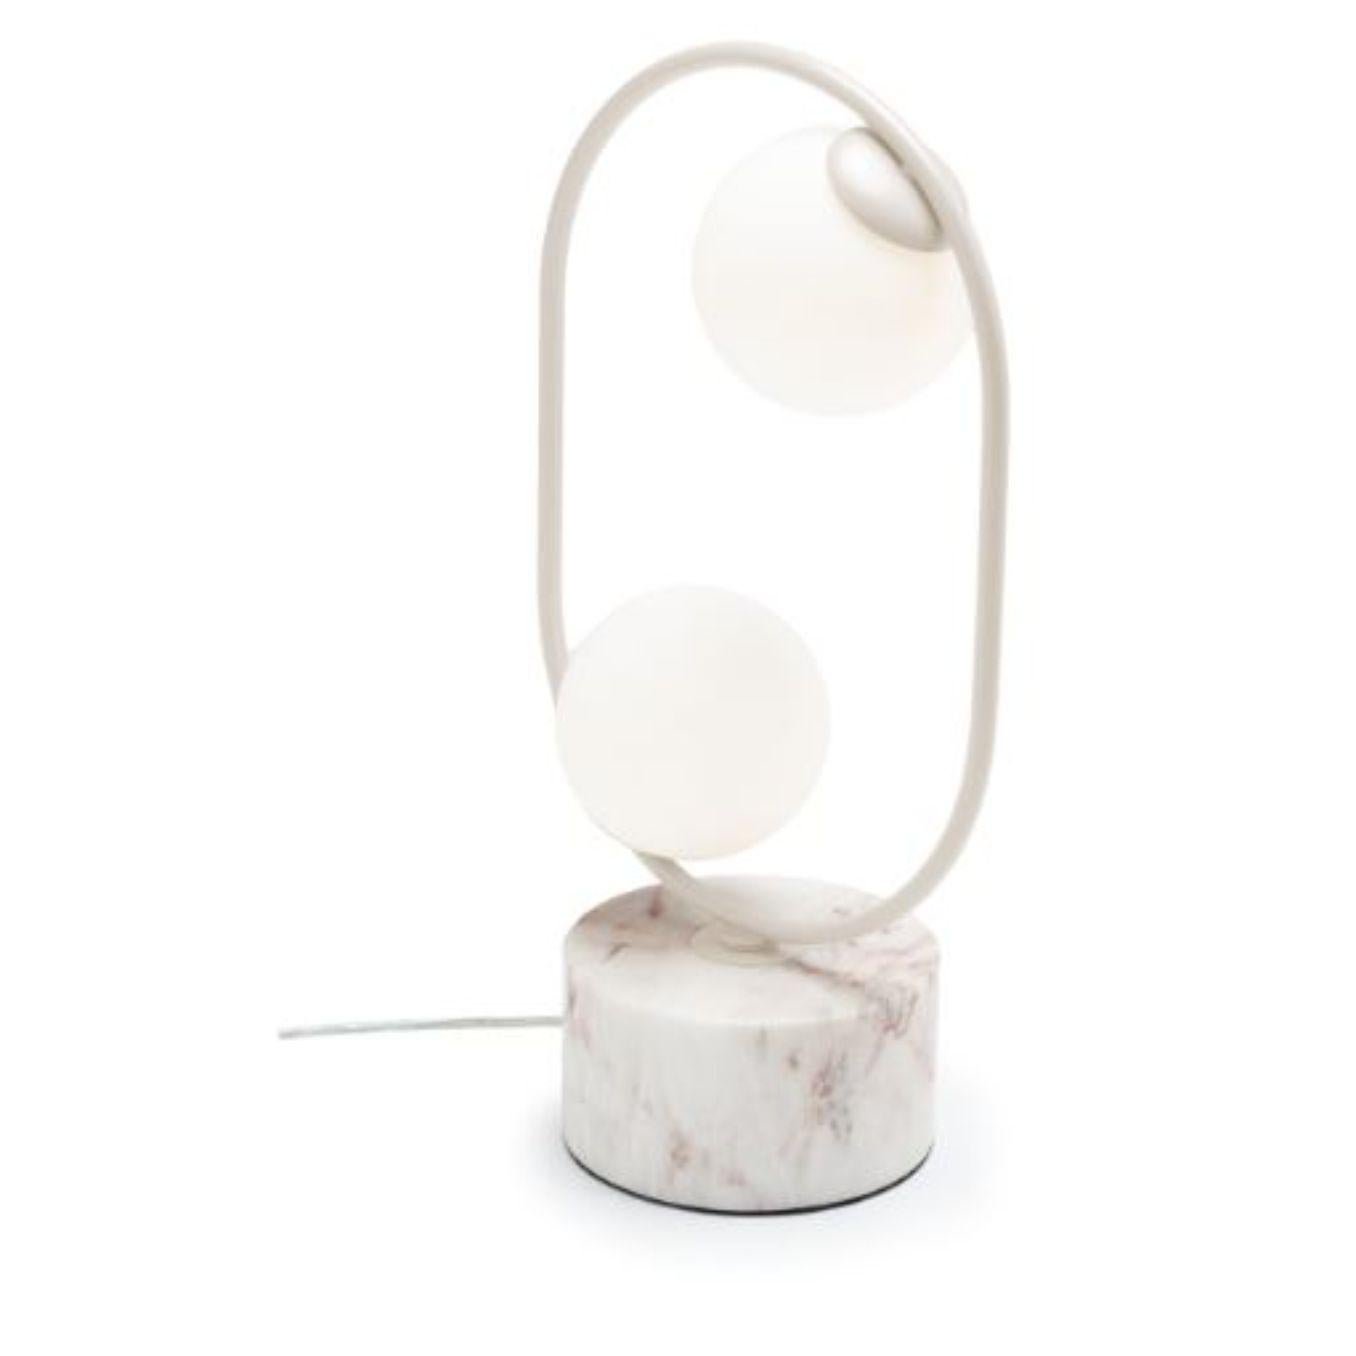 Ivory loop table I lamp with marble base by Dooq
Dimensions: W 30 x D 15 x H 50 cm
Materials: lacquered metal, polished or brushed metal, marble.
Also available in different colours and materials.

Information:
230V/50Hz
2 x max. G9
4W